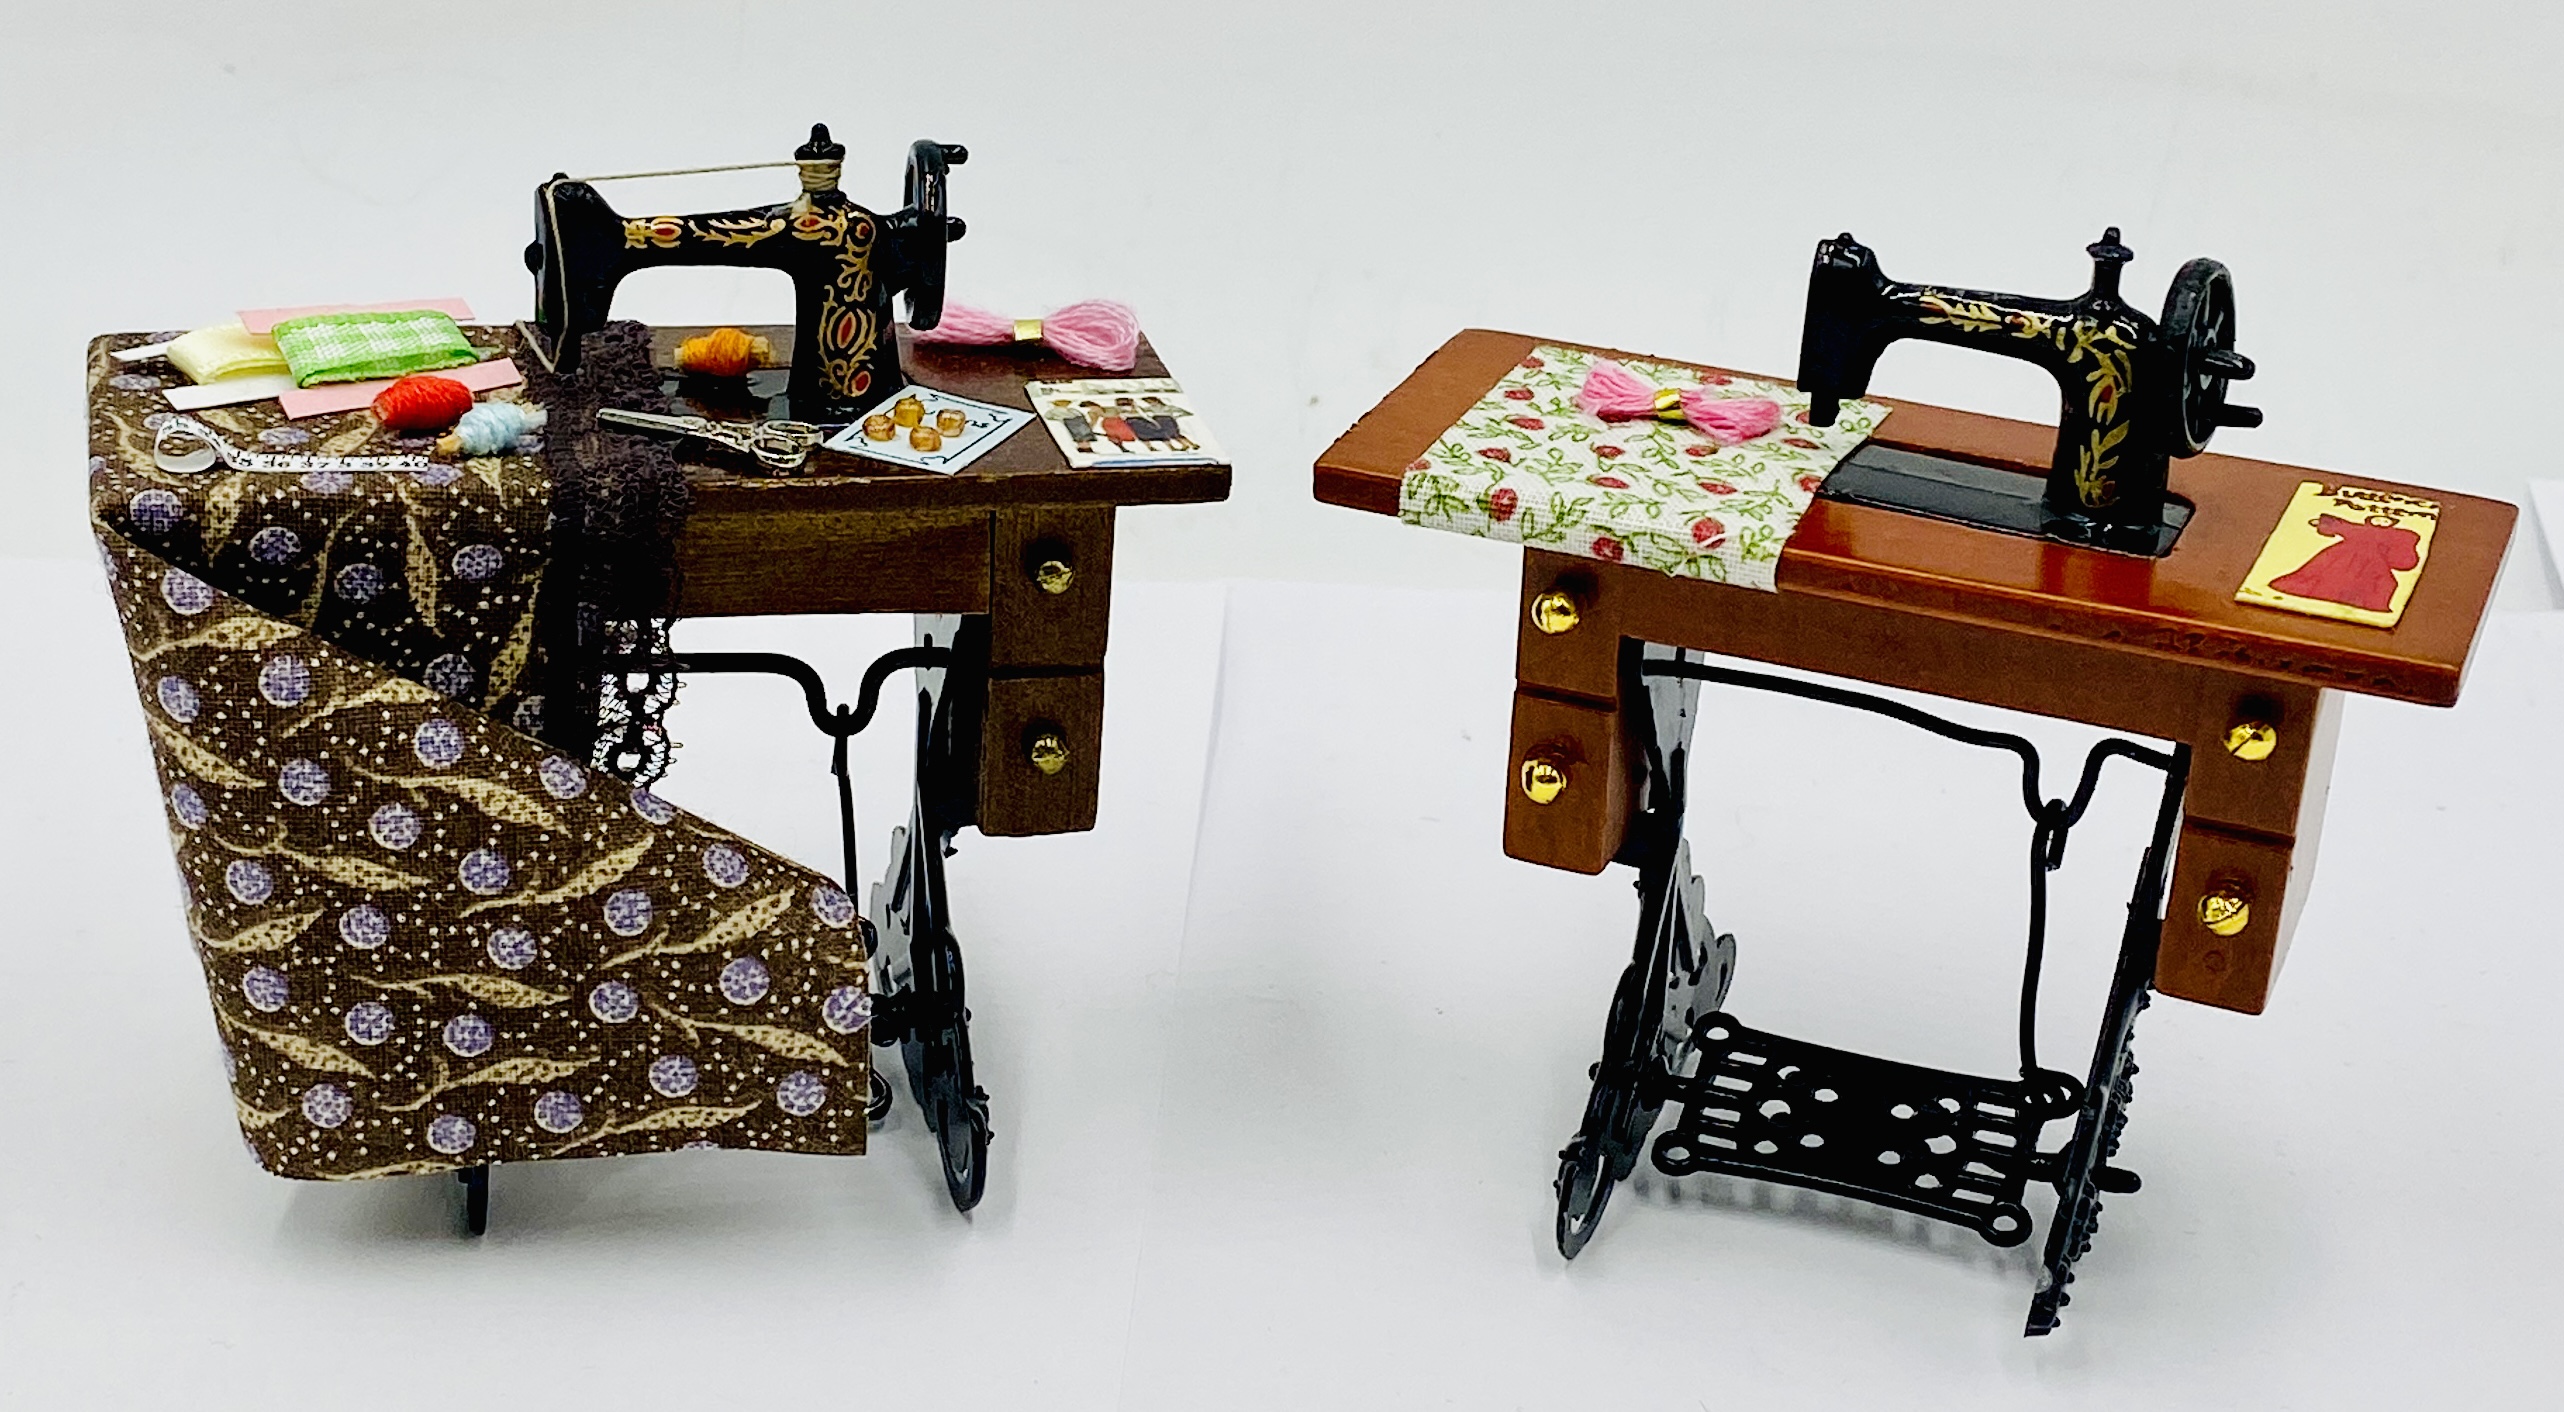 A collection of dolls house furniture and accessories including a ceramic bathroom suite, kitchen - Image 3 of 5